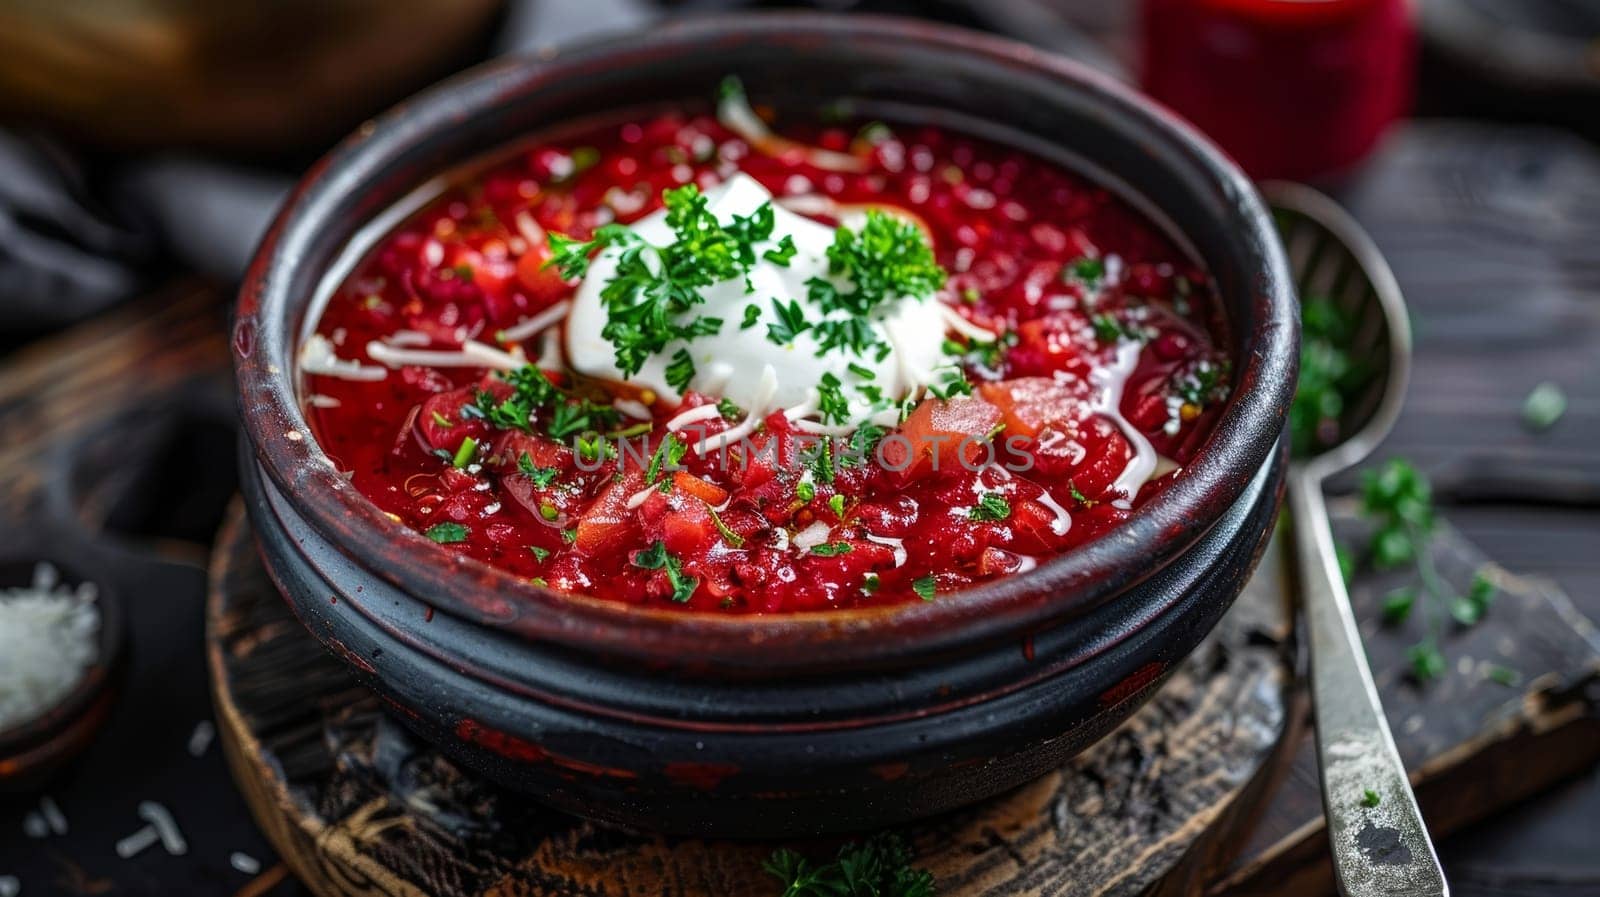 Ukrainian borscht, a traditional soup made with beetroot and vegetables, garnished with sour cream and fresh parsley, served in a rustic pot. by sfinks